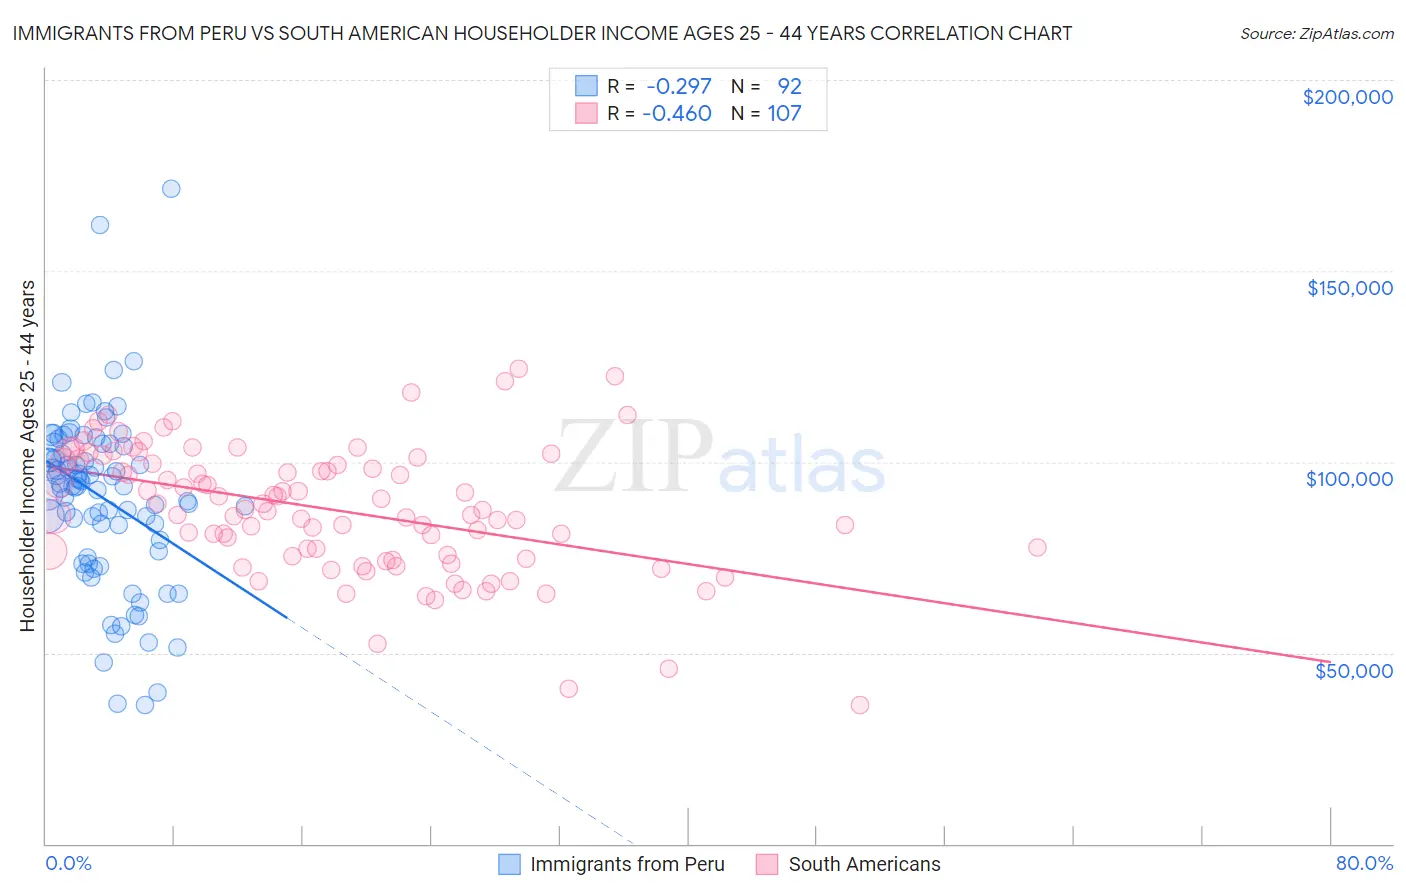 Immigrants from Peru vs South American Householder Income Ages 25 - 44 years